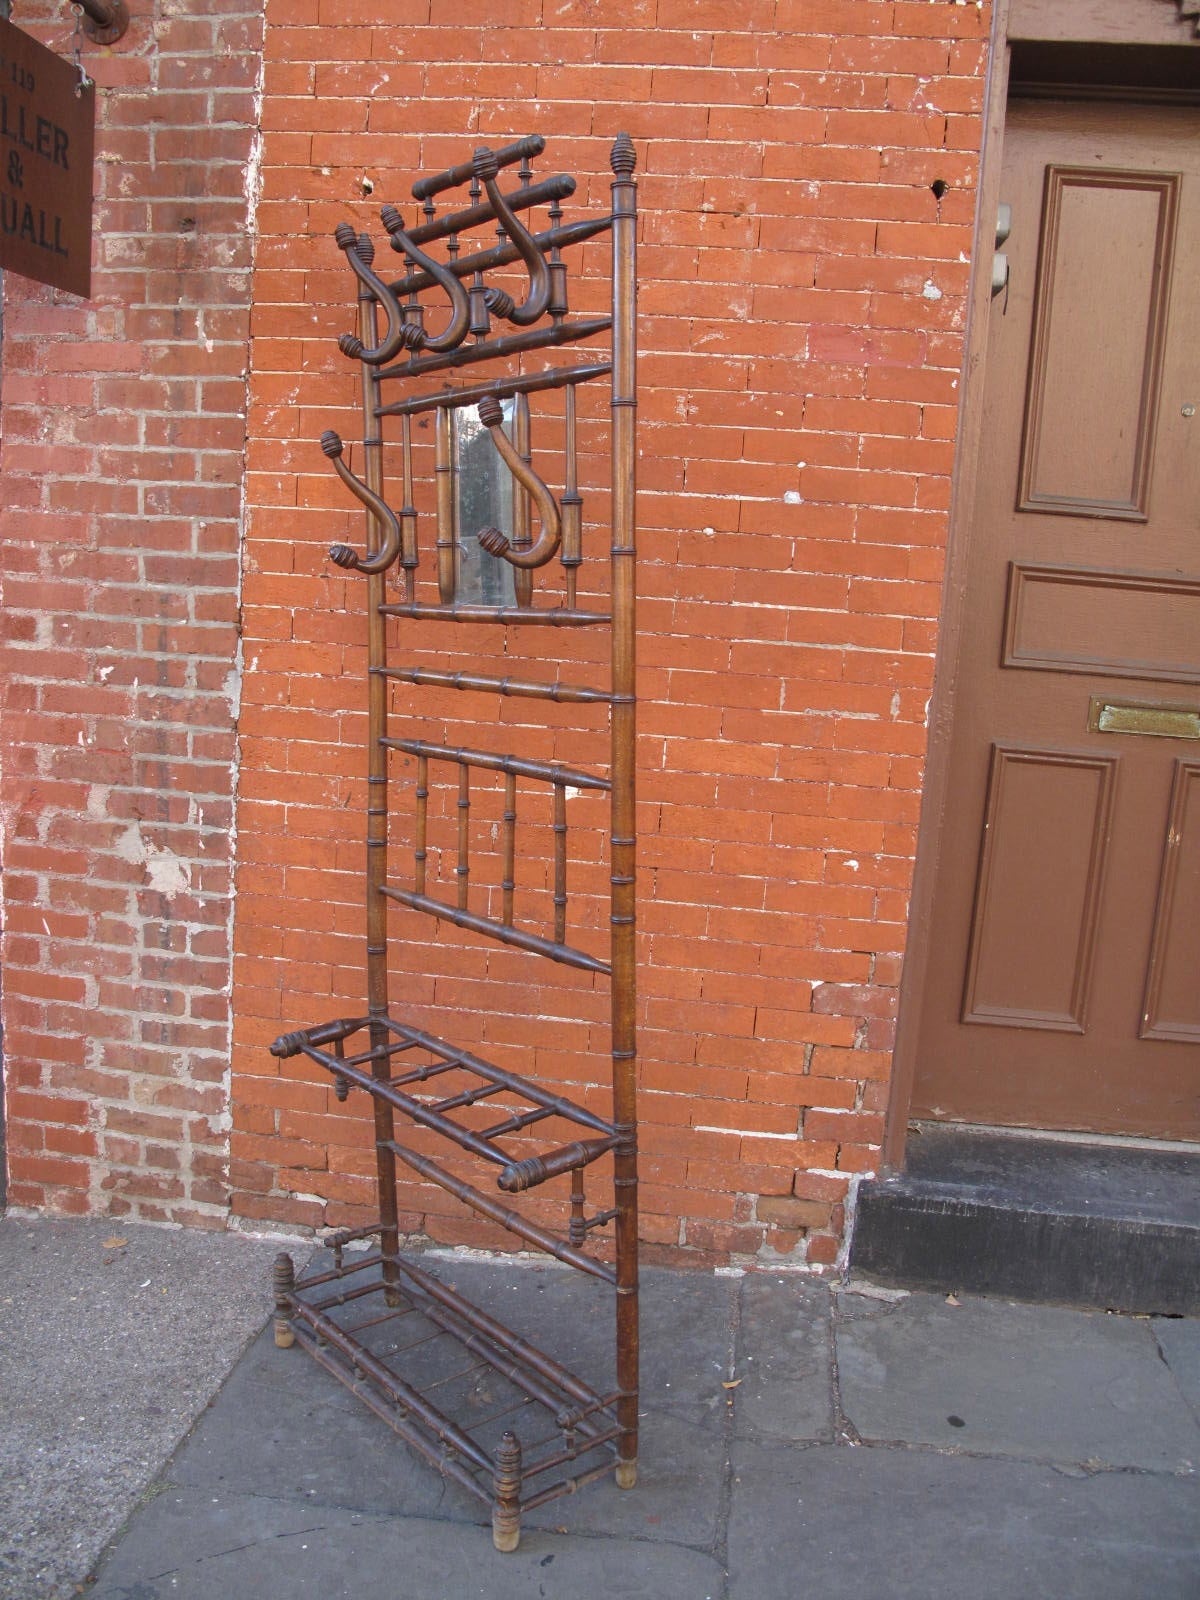 Late 19th Century English hall rack with umbrella stand at base. Carved to simulate bamboo. Hooks are able to swivel from side to side.